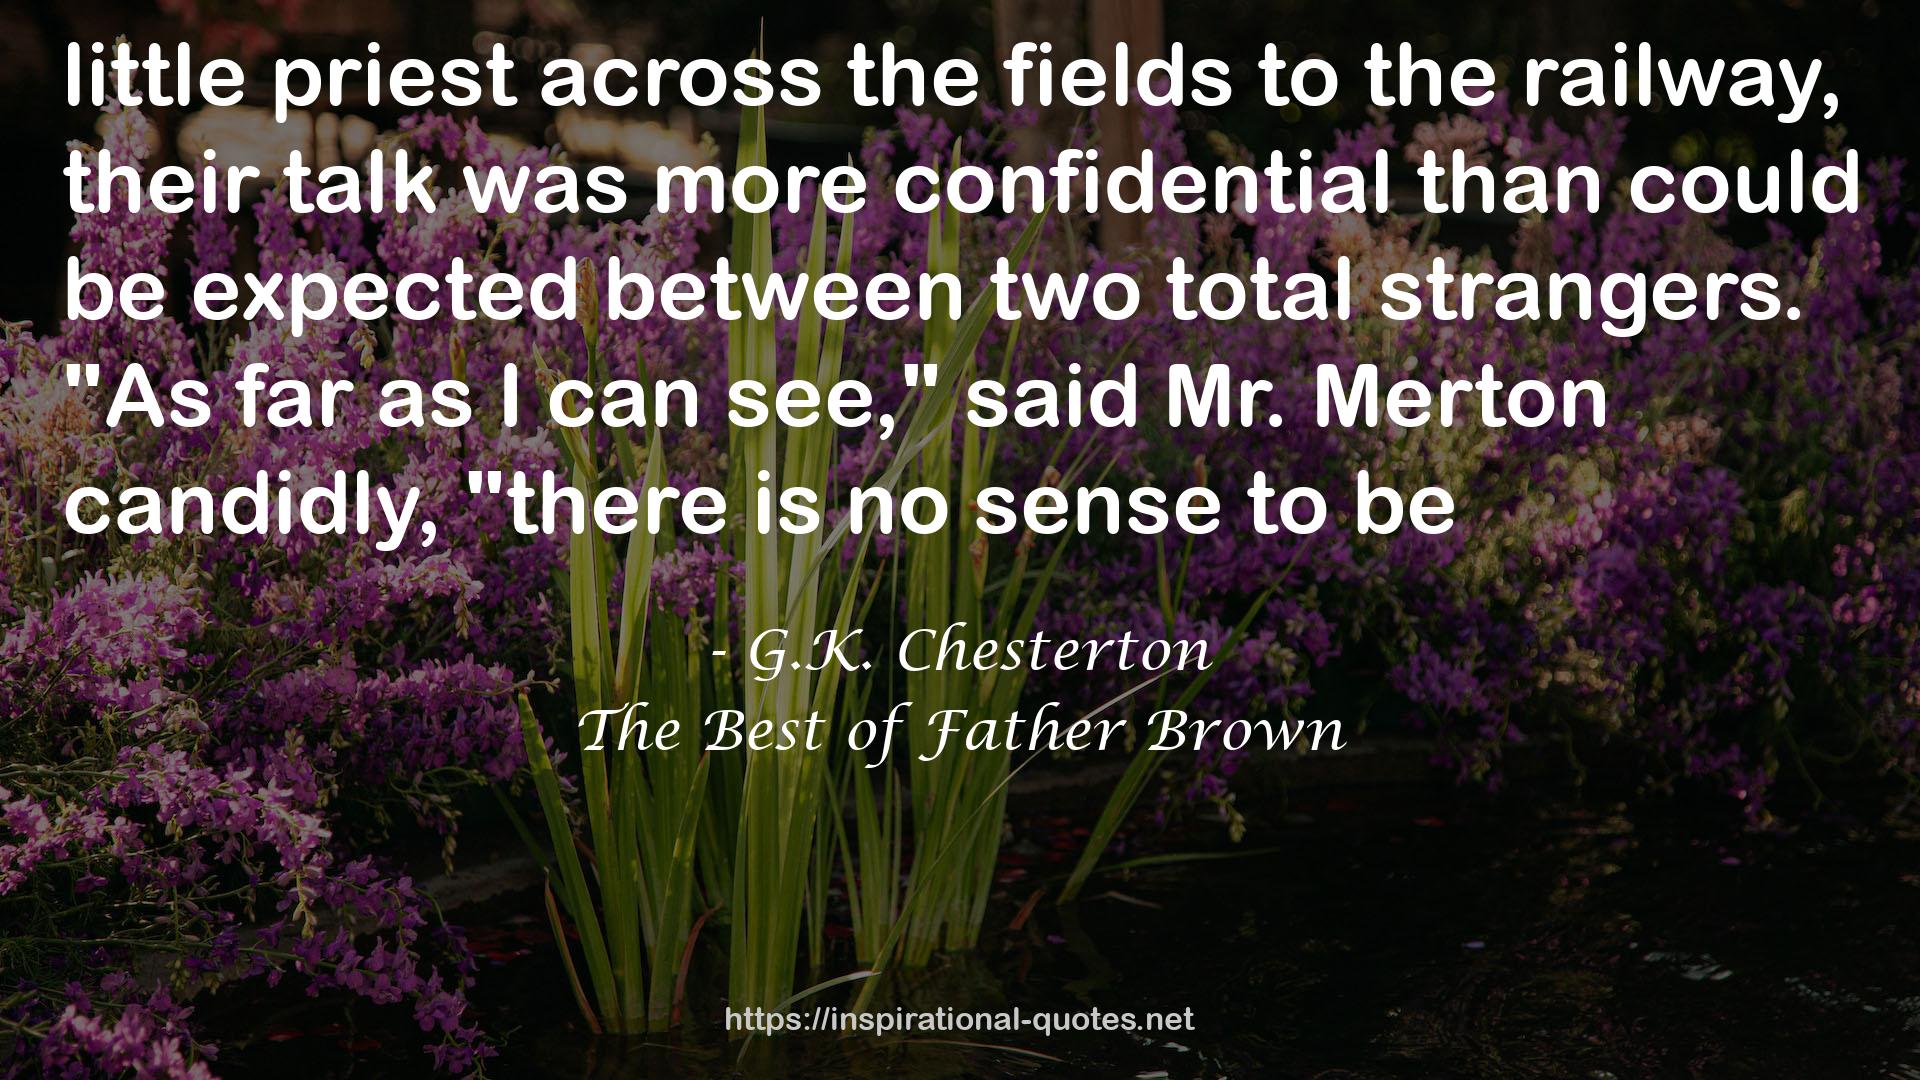 The Best of Father Brown QUOTES